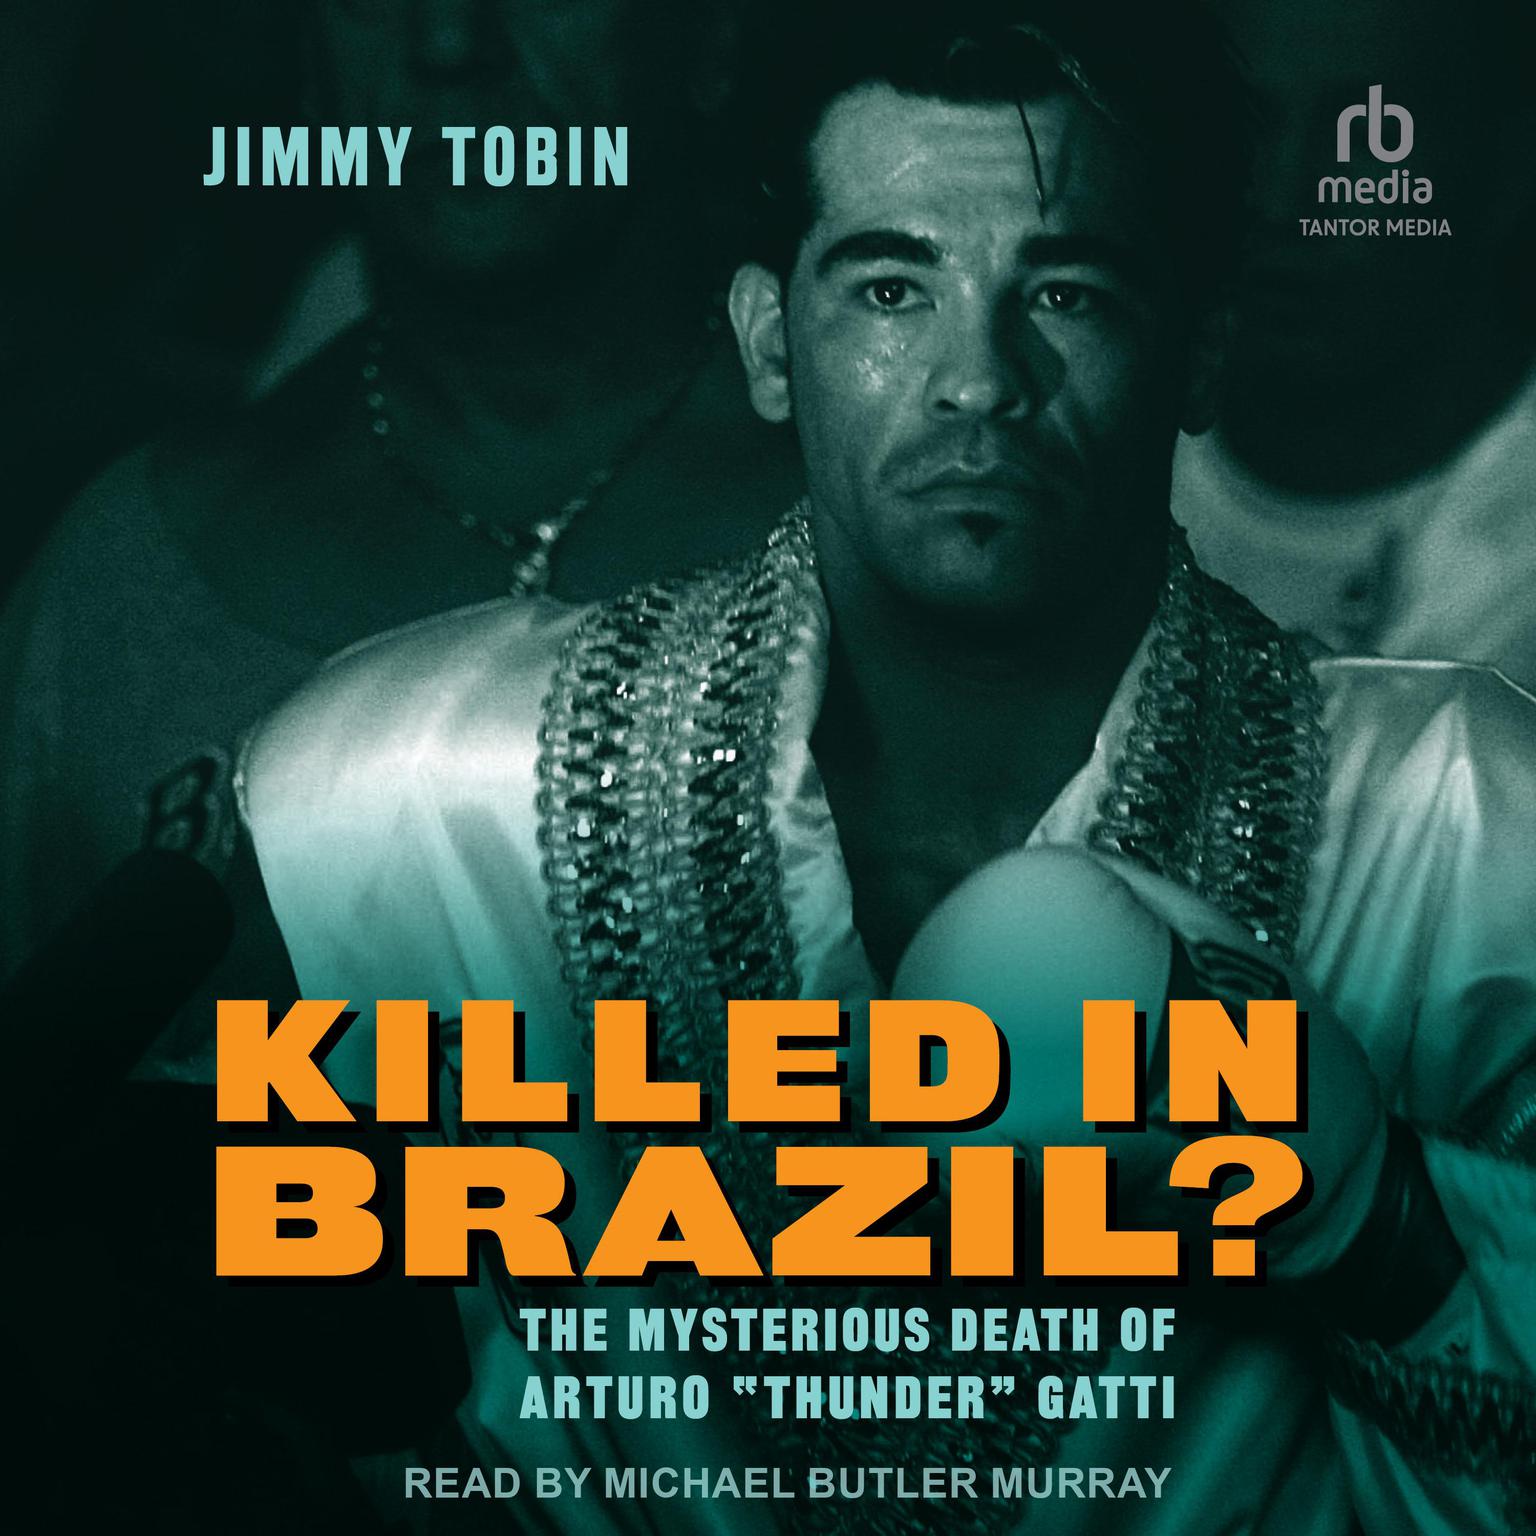 Killed in Brazil?: The Mysterious Death of Arturo “Thunder” Gatti Audiobook, by Jimmy Tobin